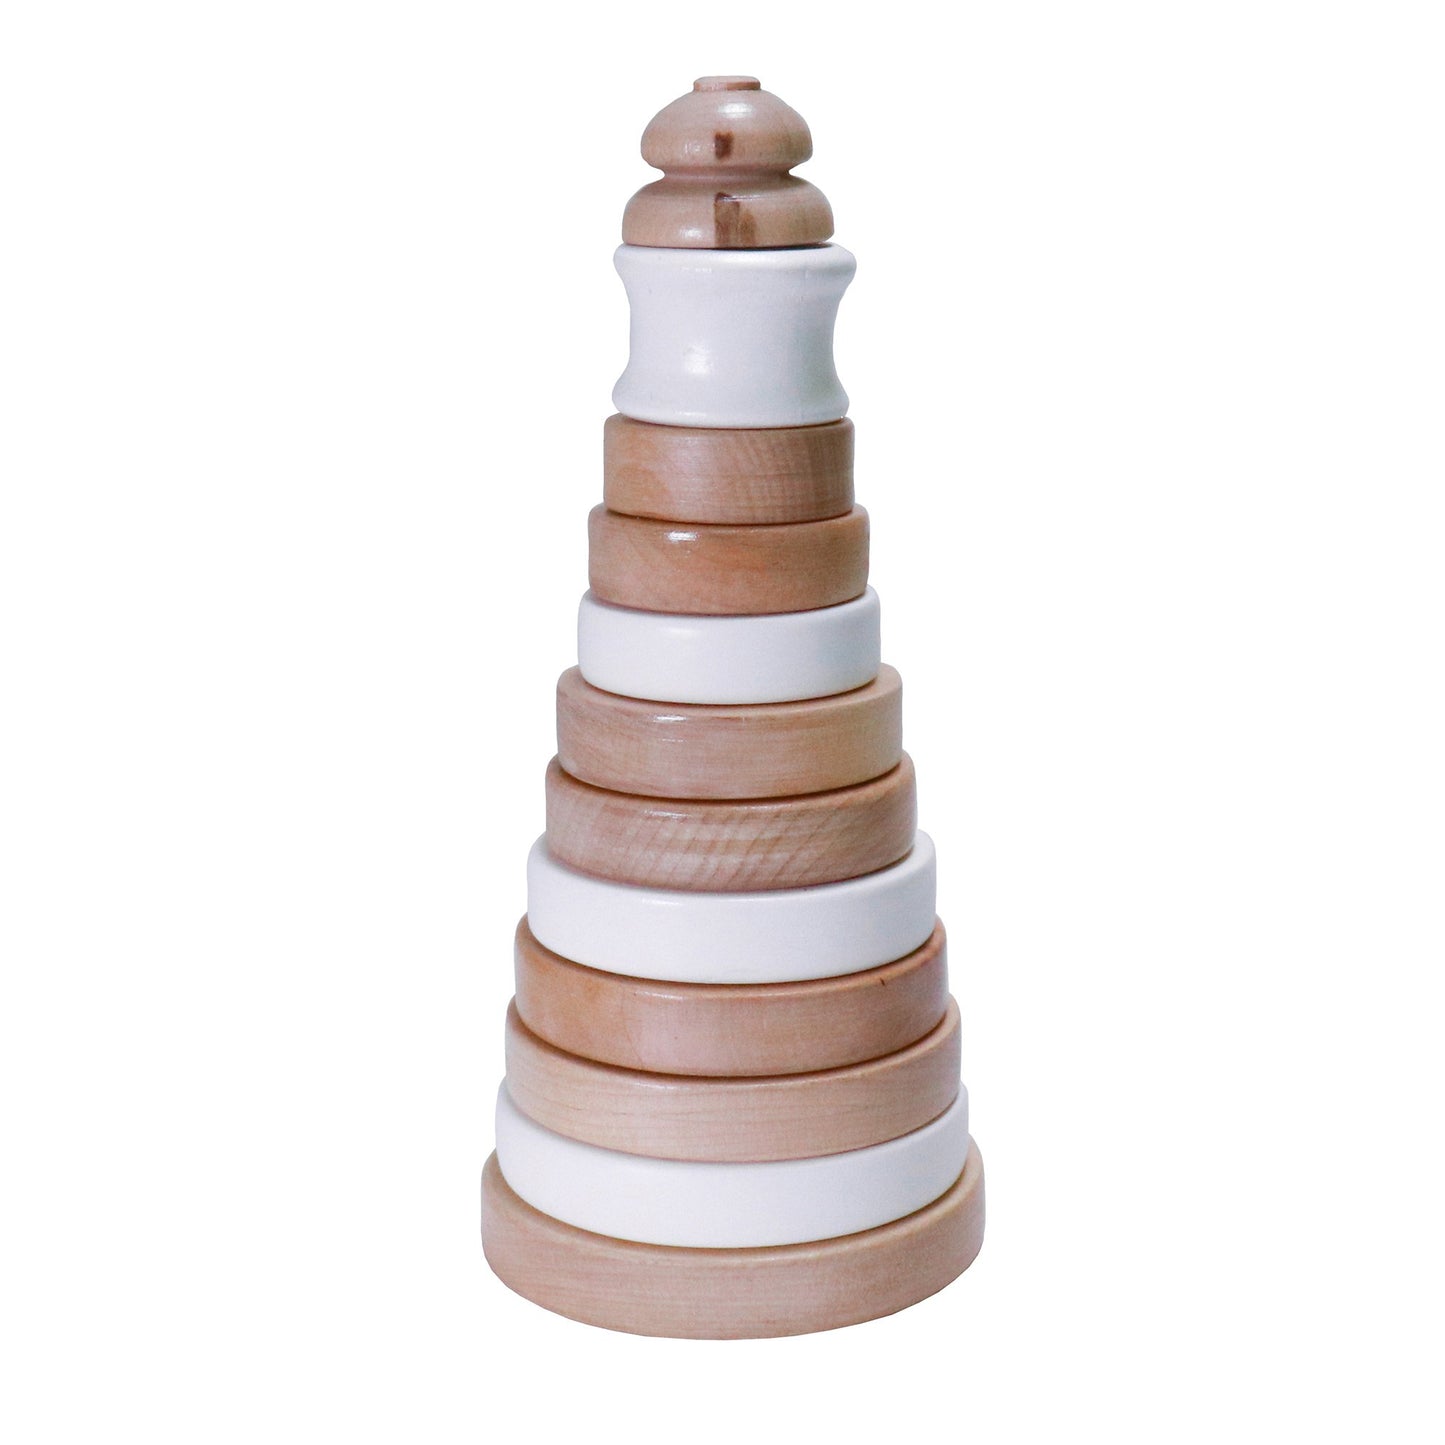 Wooden Stacking Toy - White